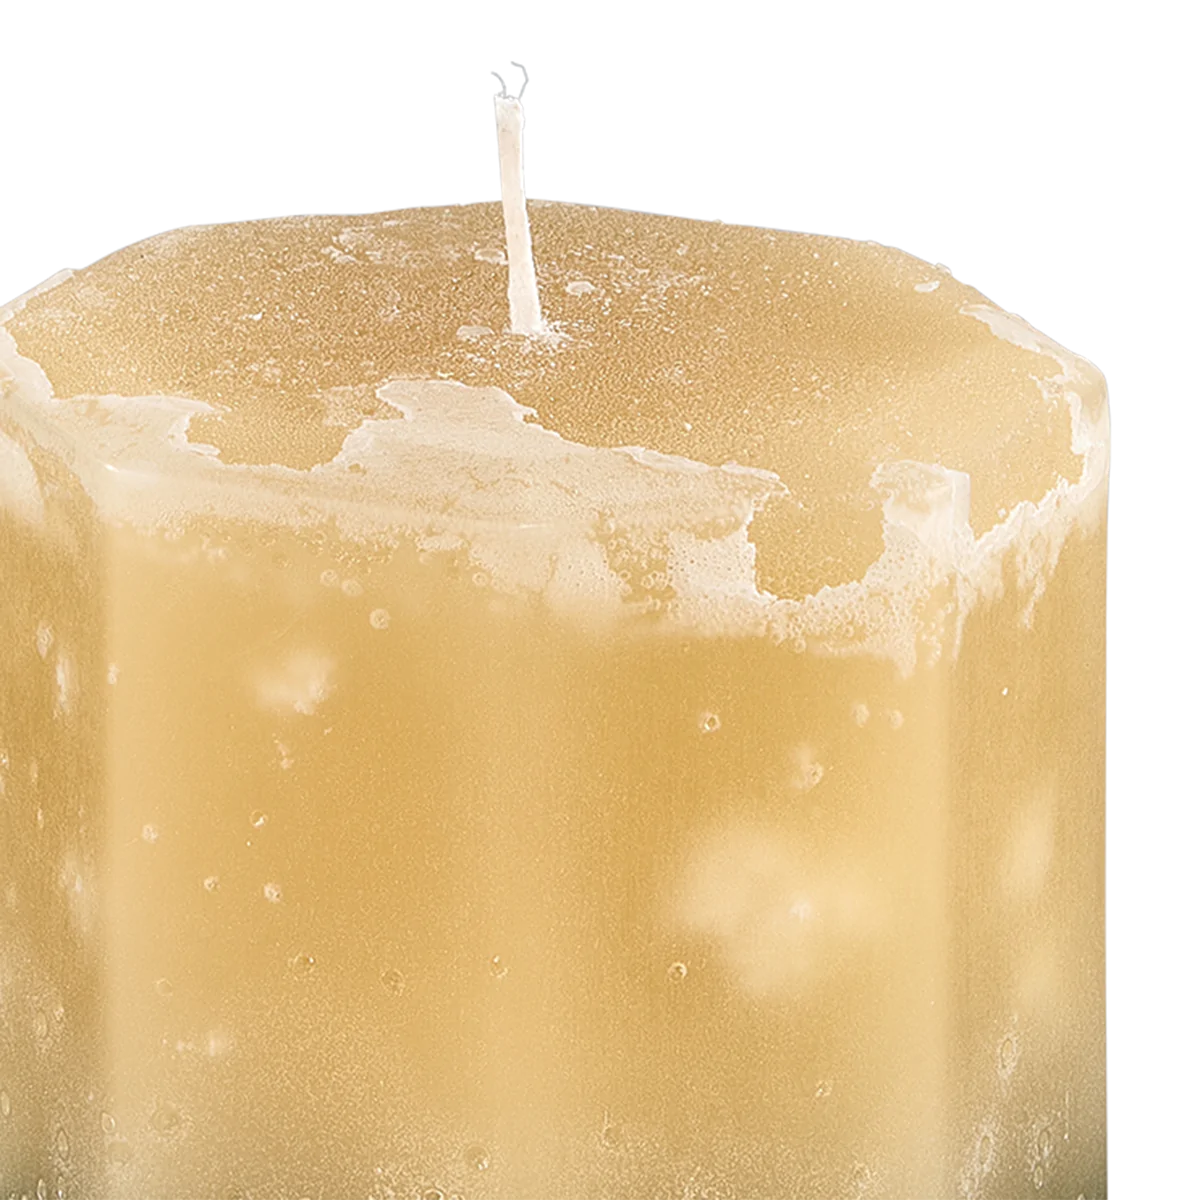 Winter Spice Octagon Candle